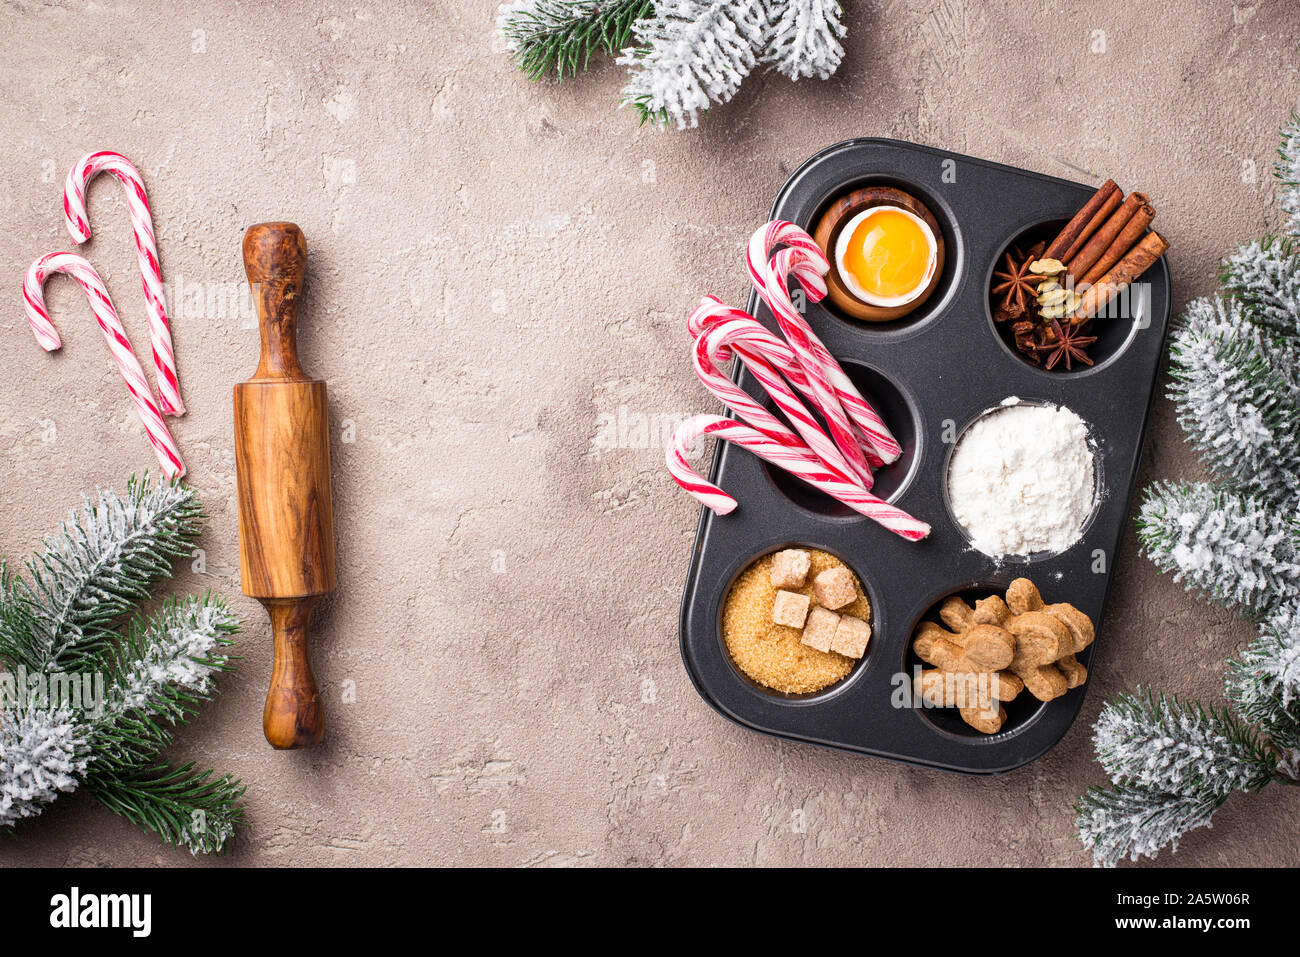 Ingredients for baking Christmas cookies Stock Photo - Alamy